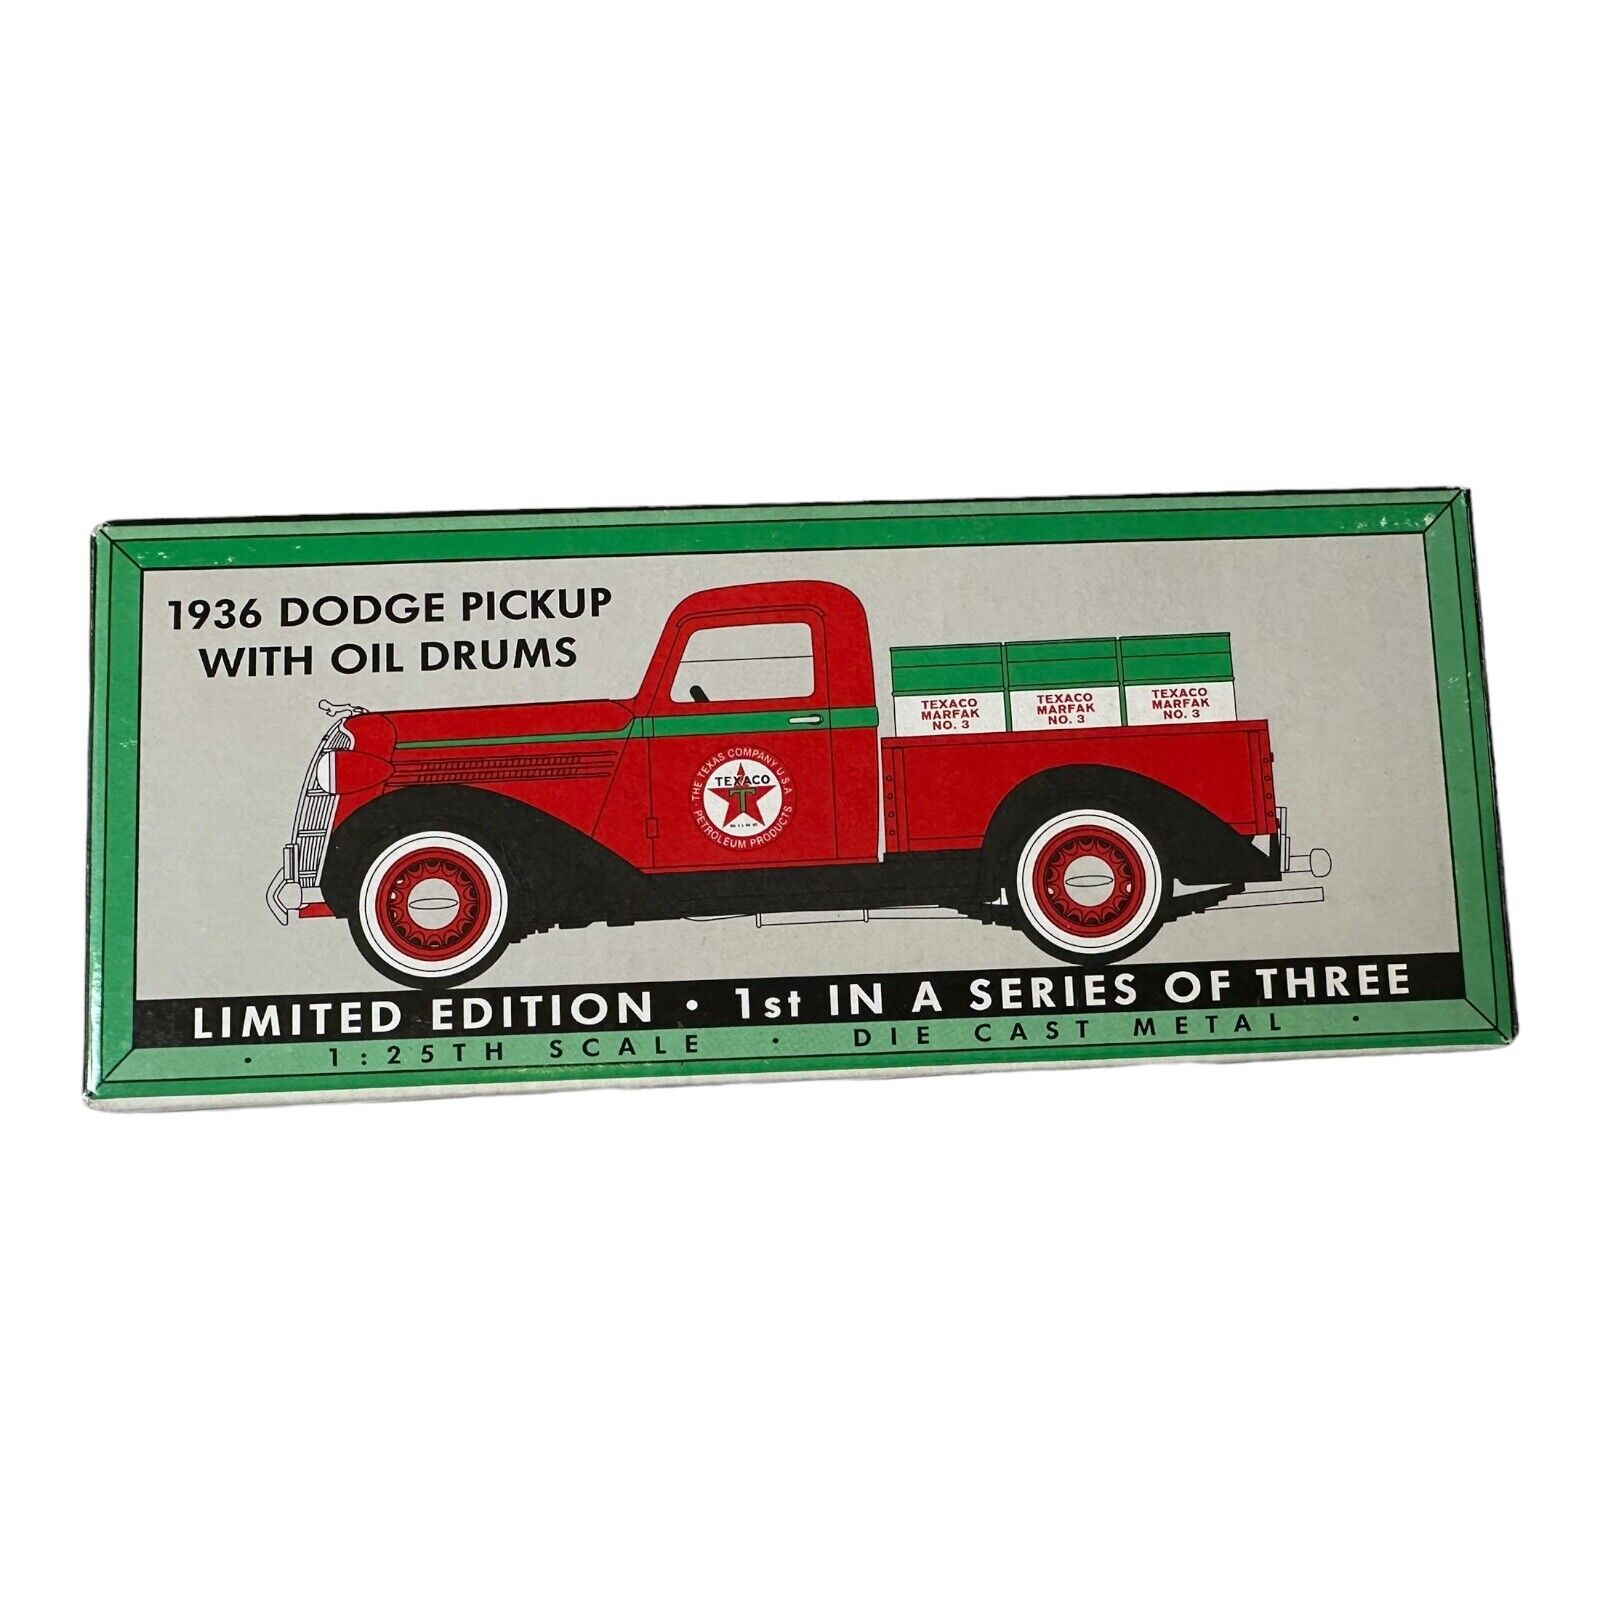 Texaco 1936 Dodge Pickup With Oil Drums Limited Edition